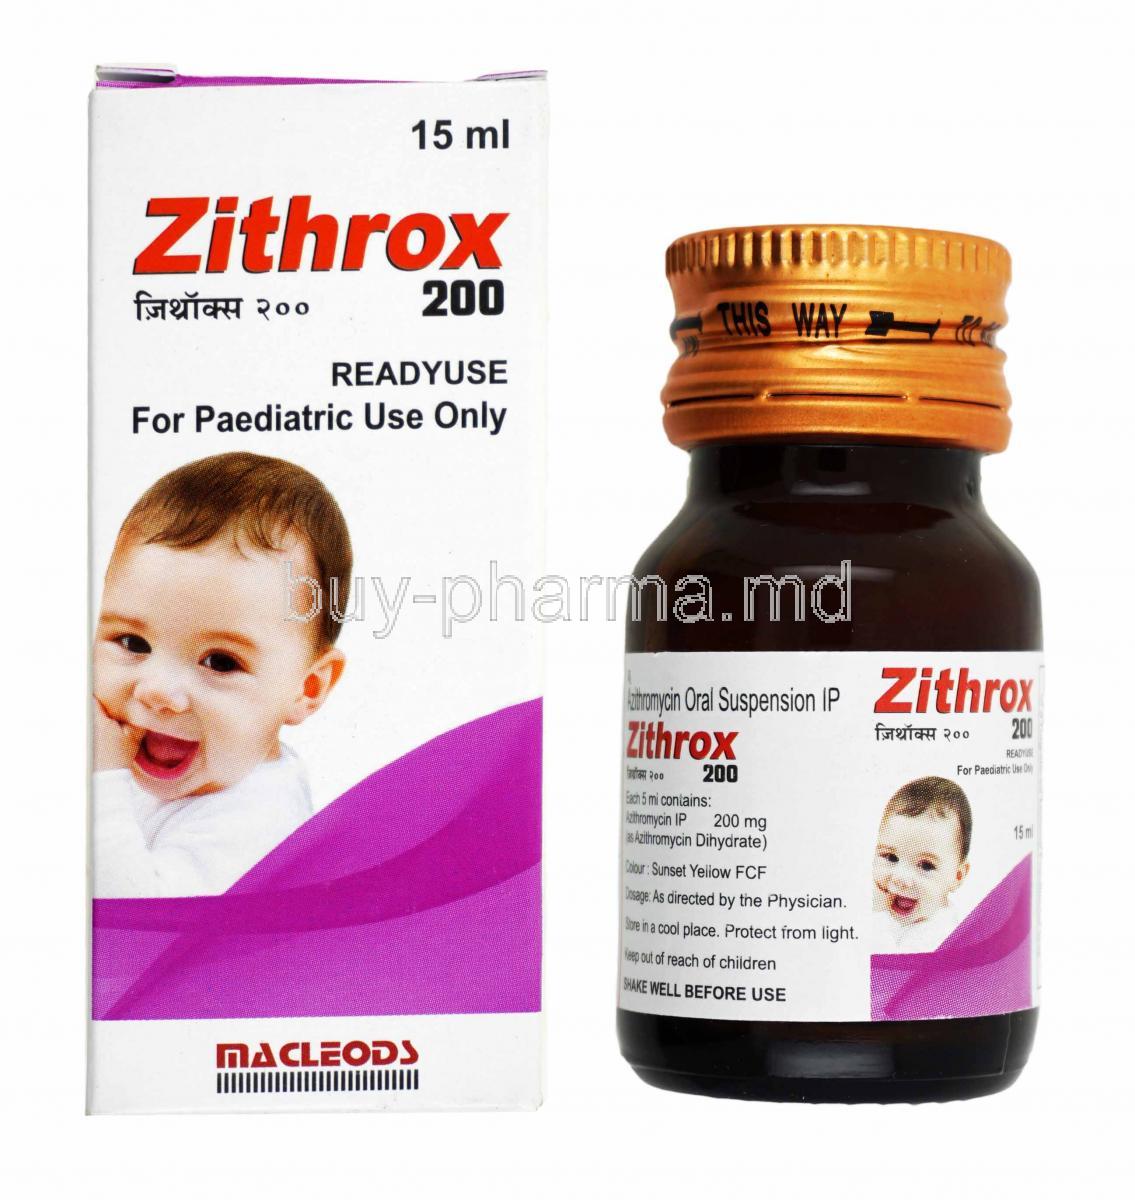 Zithrox Oral Suspensionicon, Azithromycin 200mg box and bottle